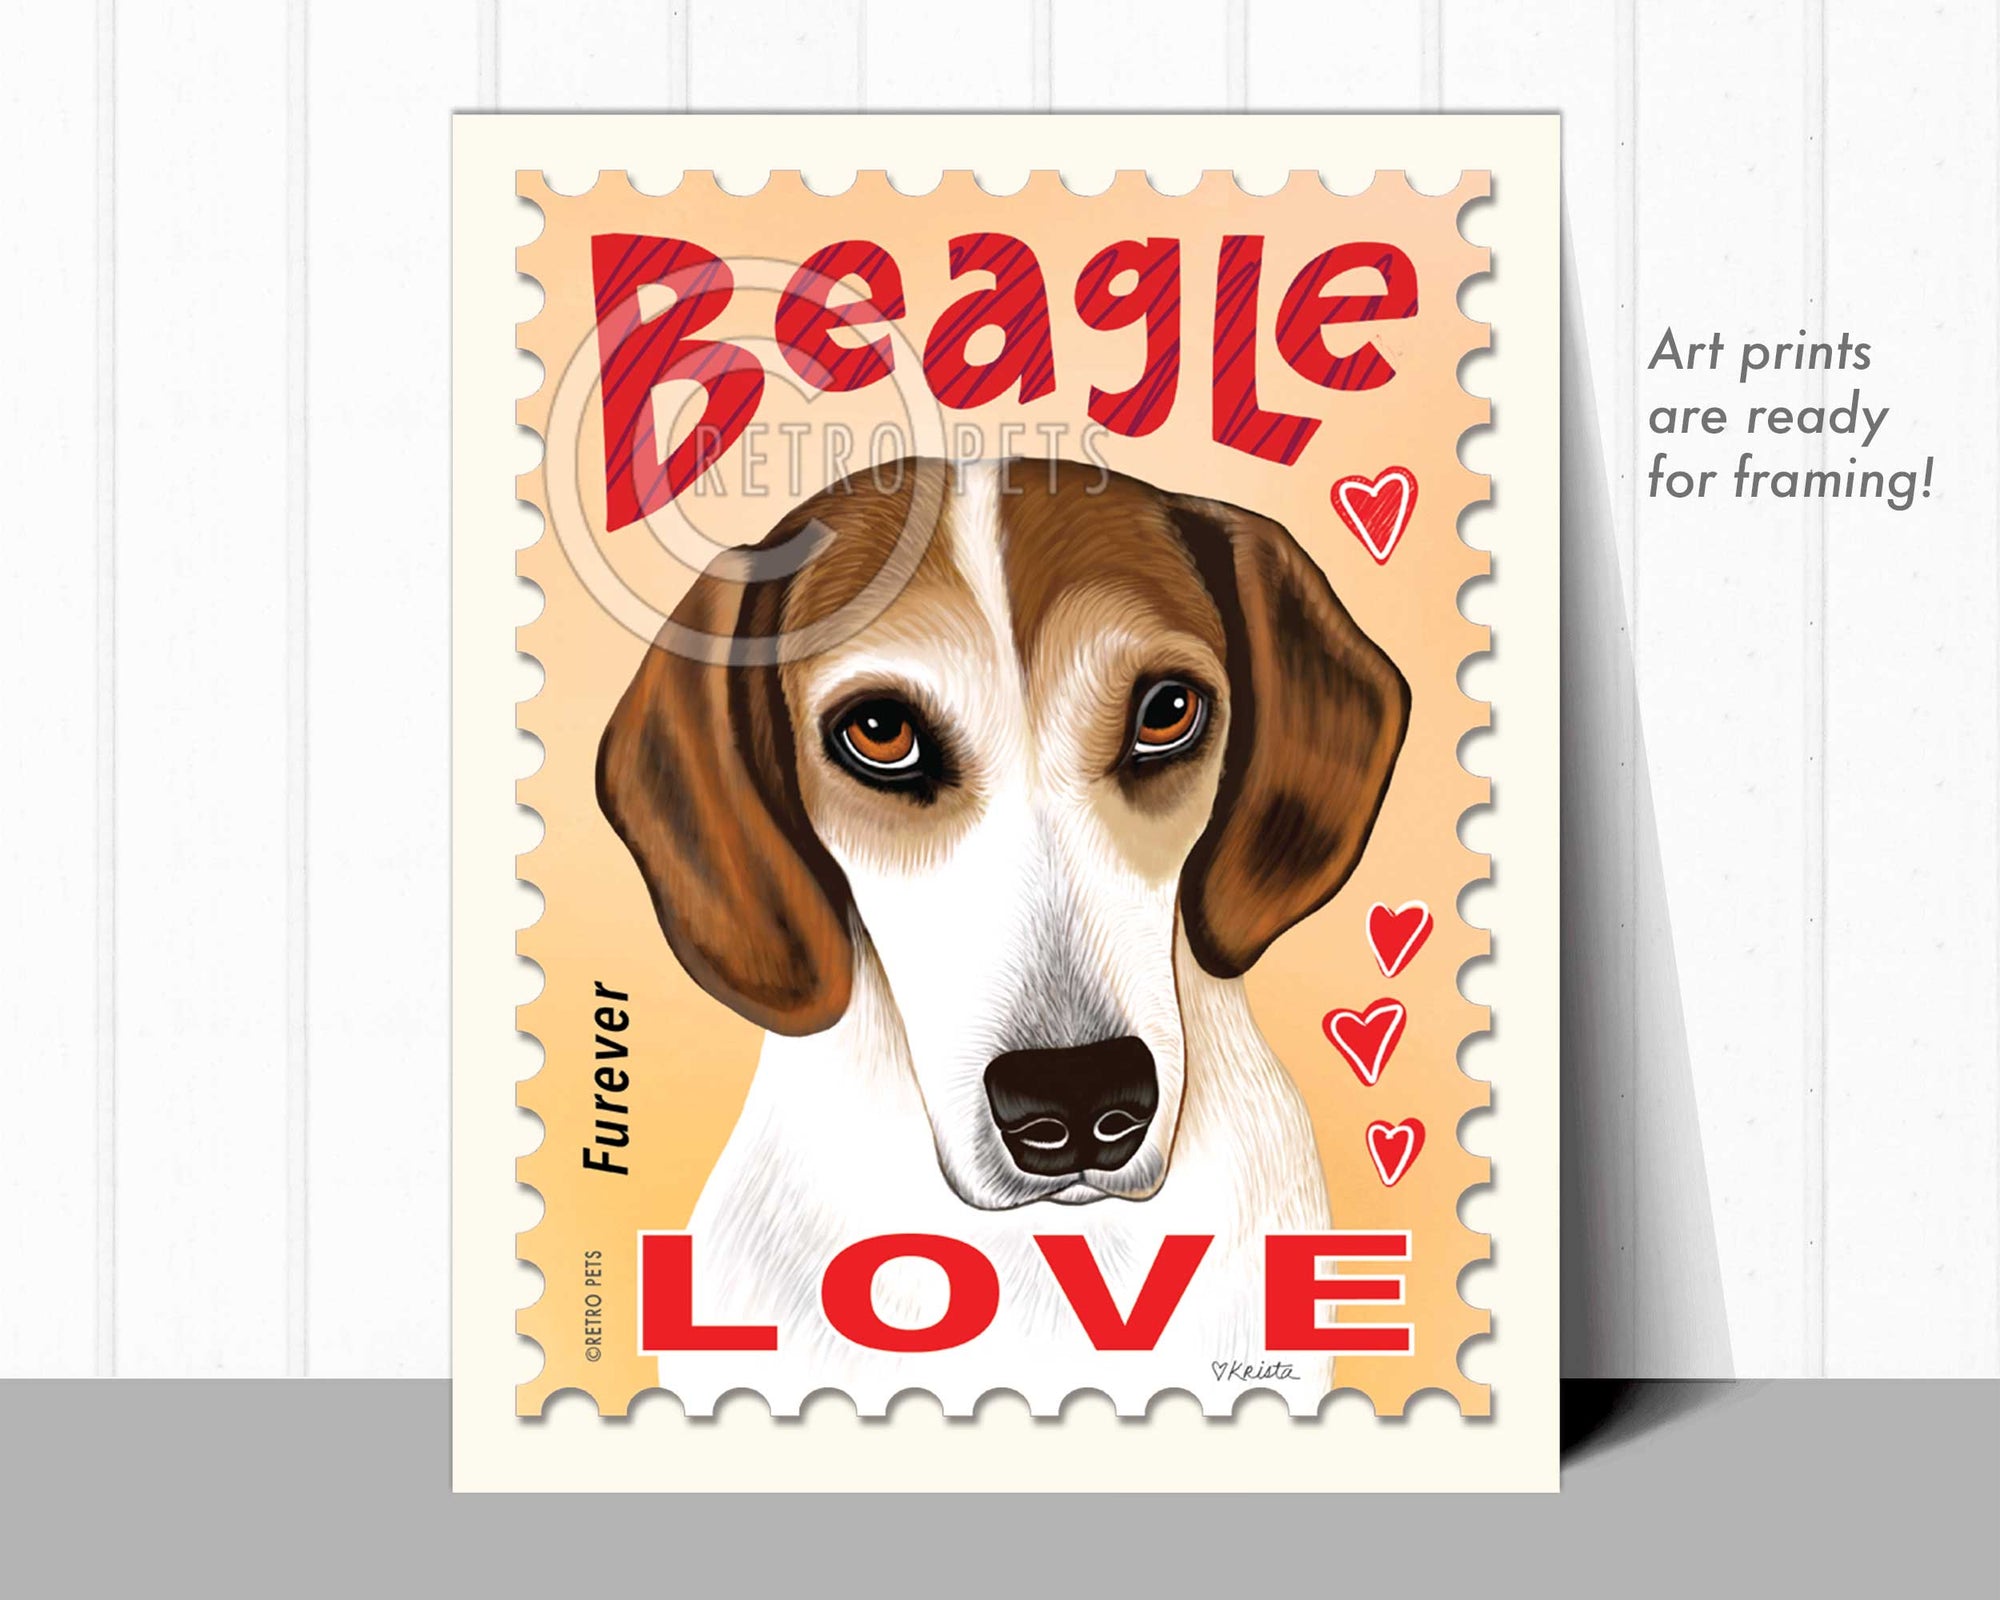 Beagle Art, Beagle Gifts, Beagle Wall Art, Beagle LOVE Stamp  UNFRAMED but shown in frame as example